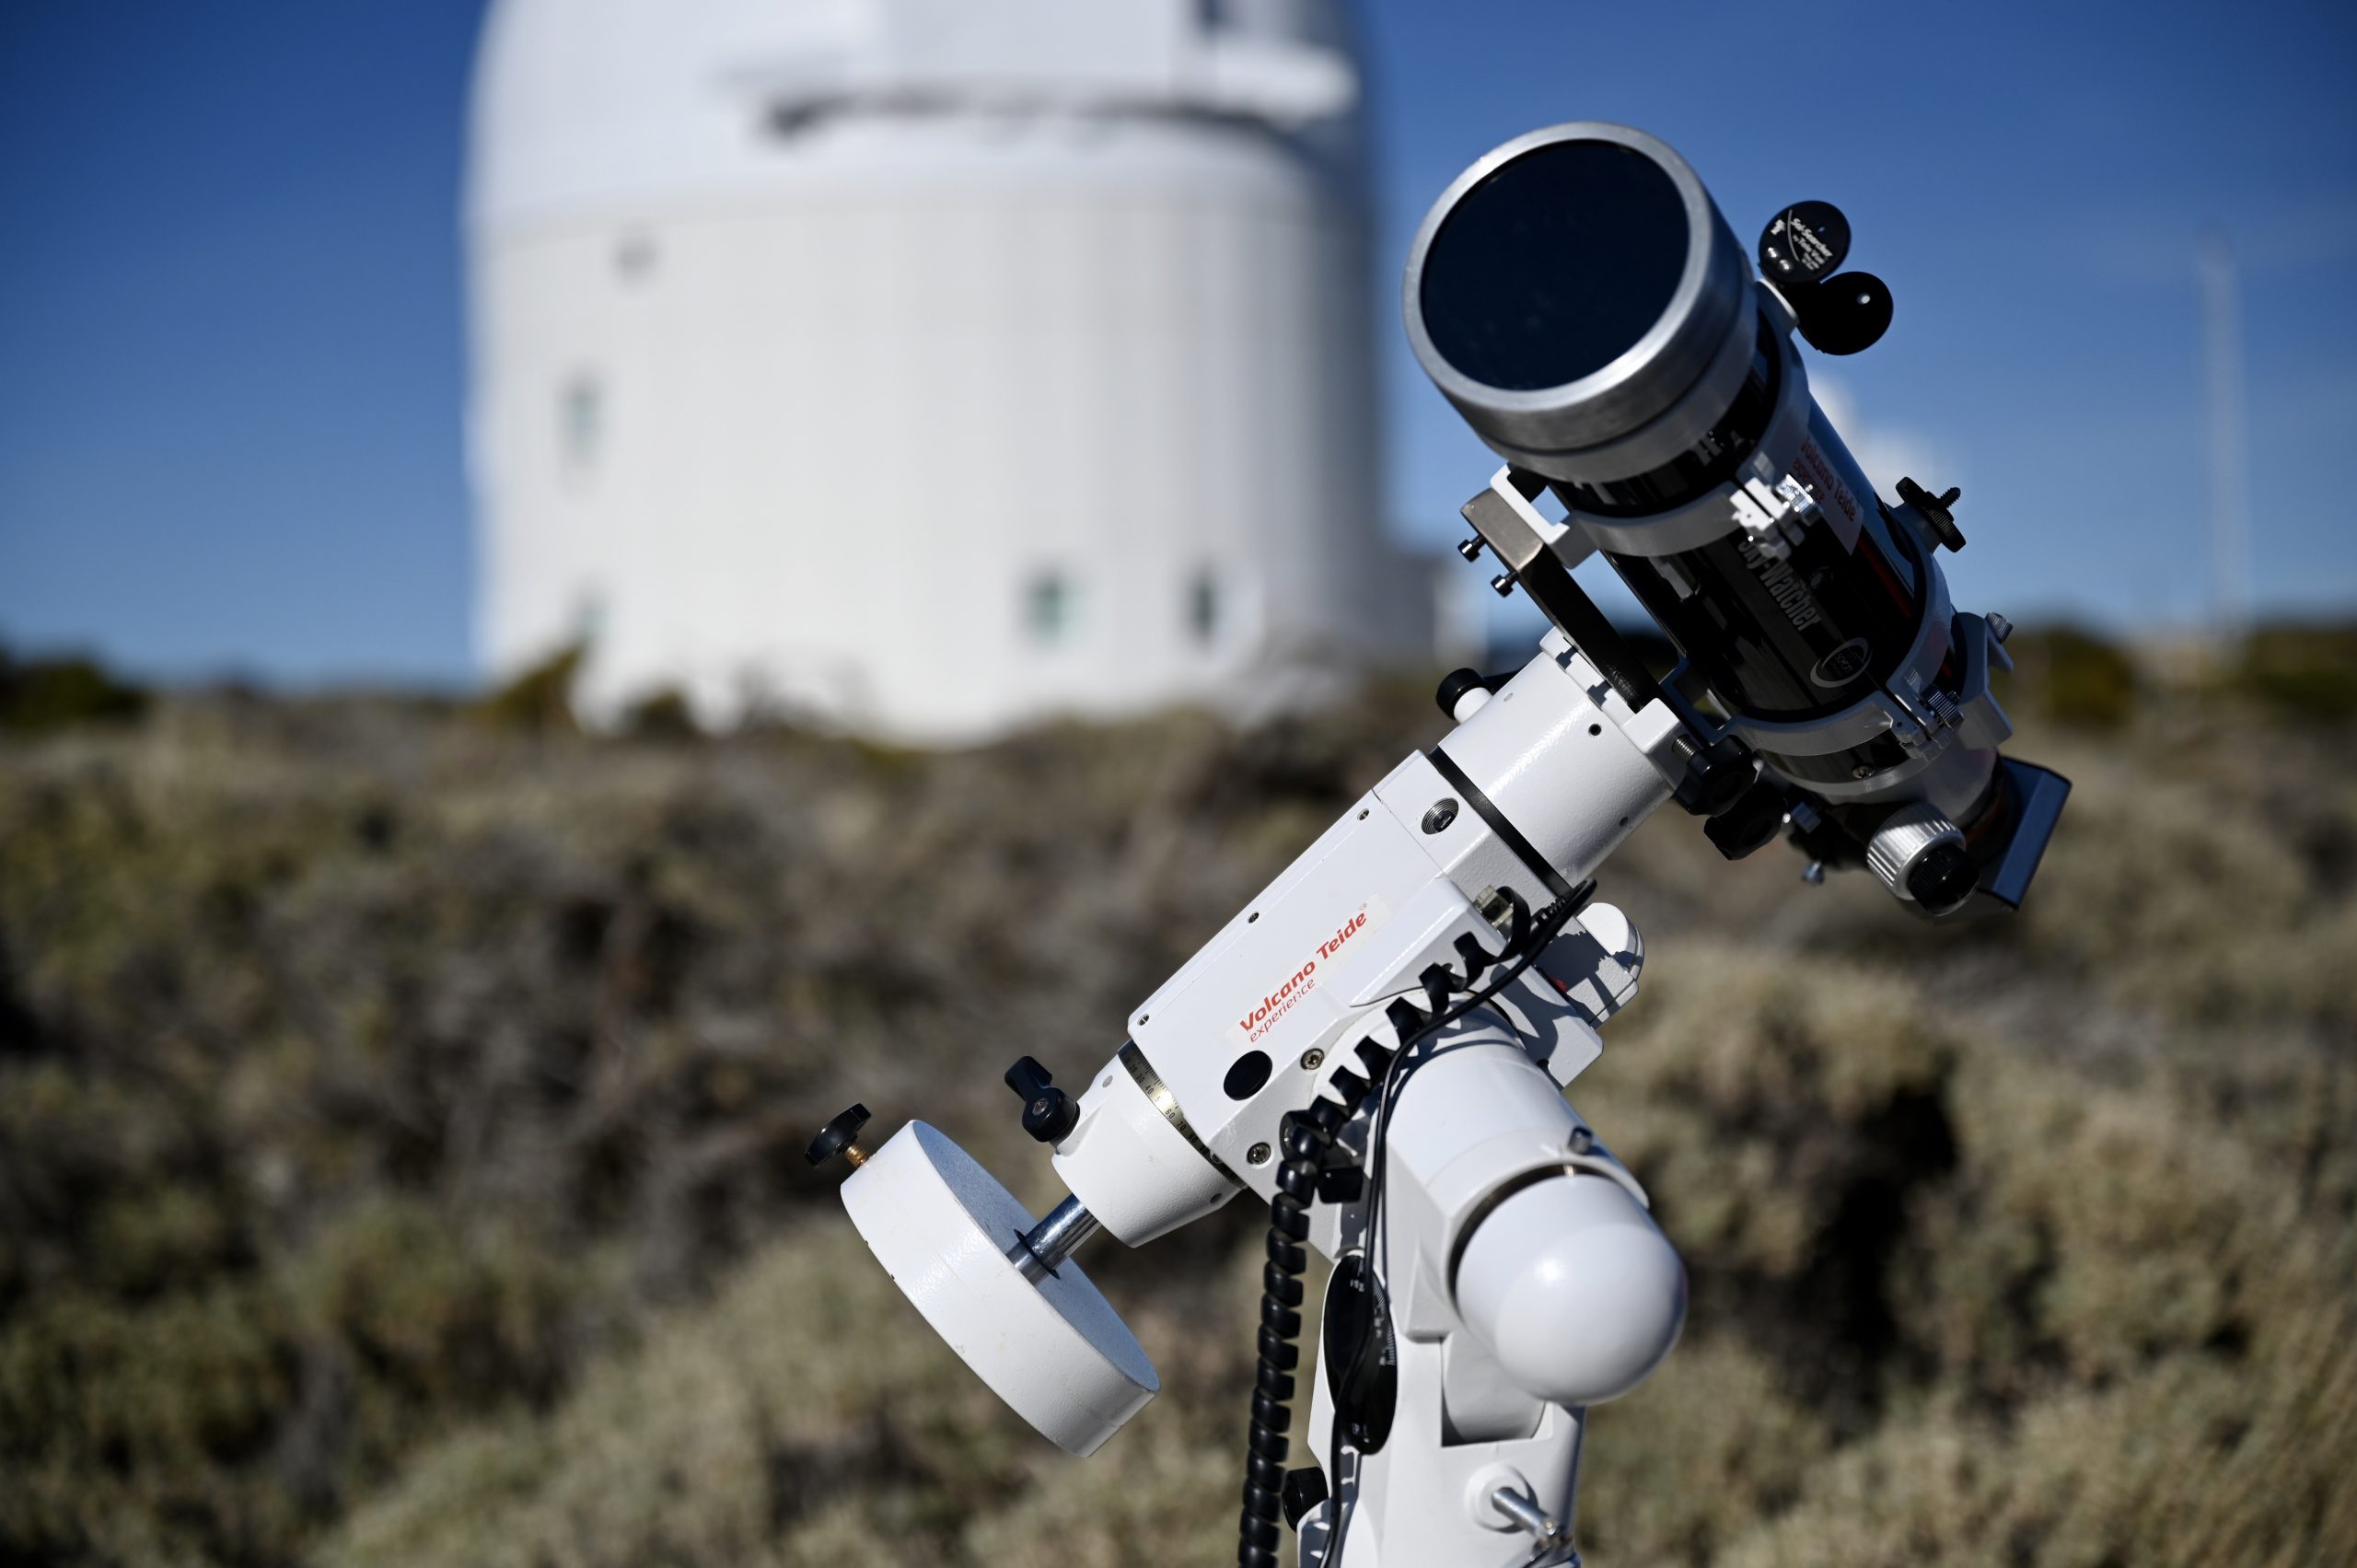 Mount and telescope - good astronomy gifts idea.